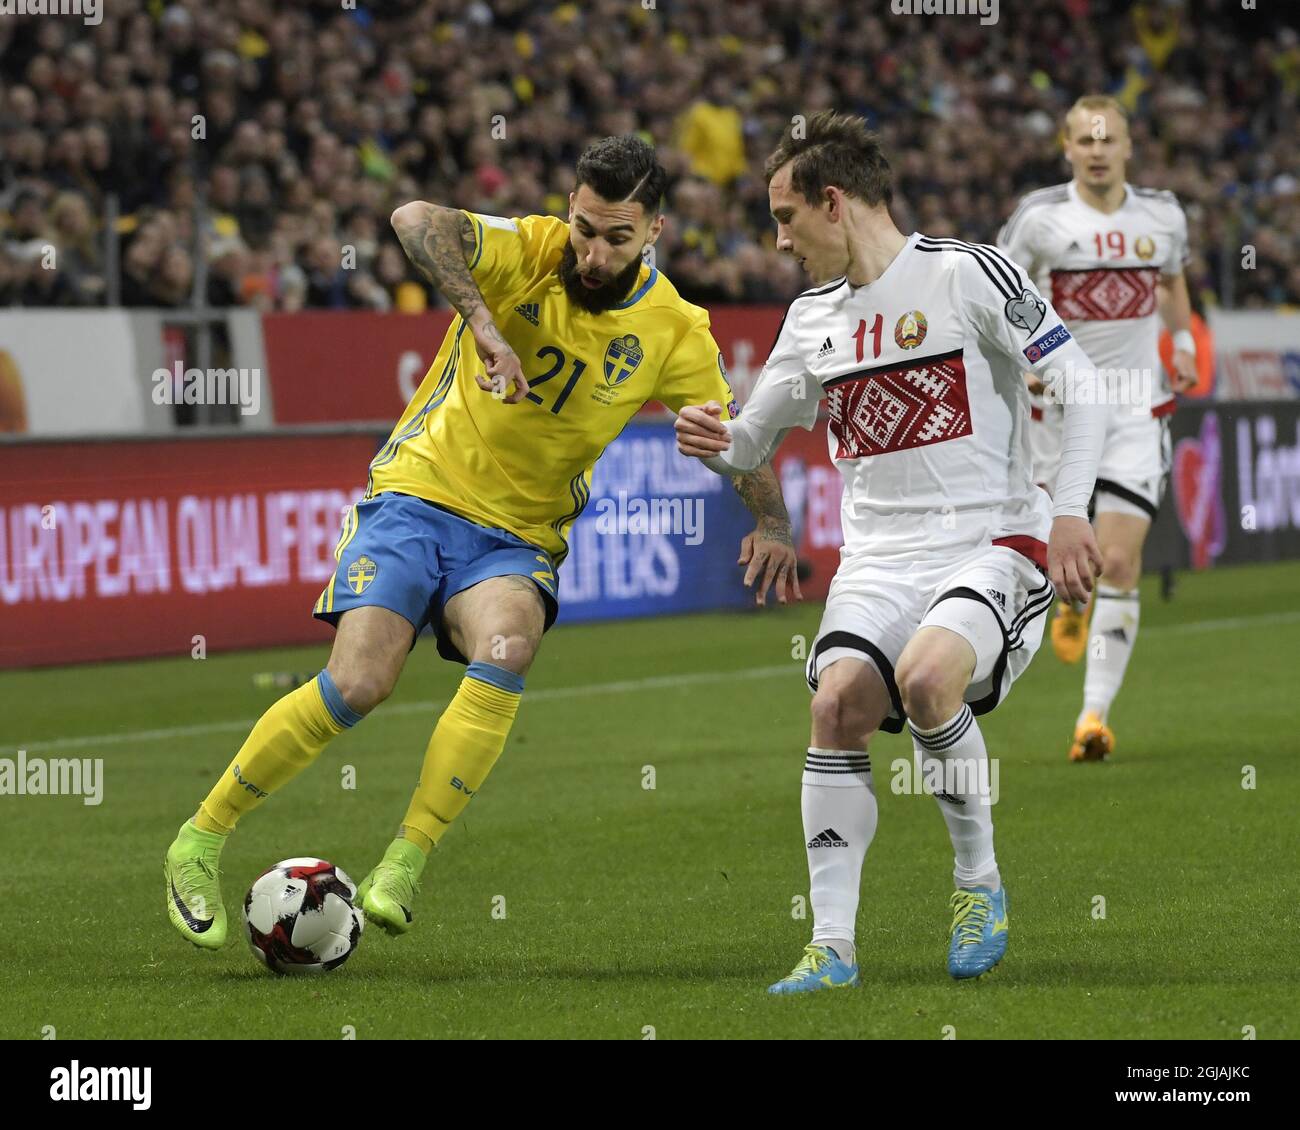 Sweden's Jimmy Durmaz and Belarus' Mikhail Gordeichuk during the FIFA World Cup Qualifier Europe Group A soccer match between Sweden and Belarus at Friends Arena in Solna, Sweden March 25, 2017. Photo: Janerik Henriksson / TT / Kod 10010  Stock Photo